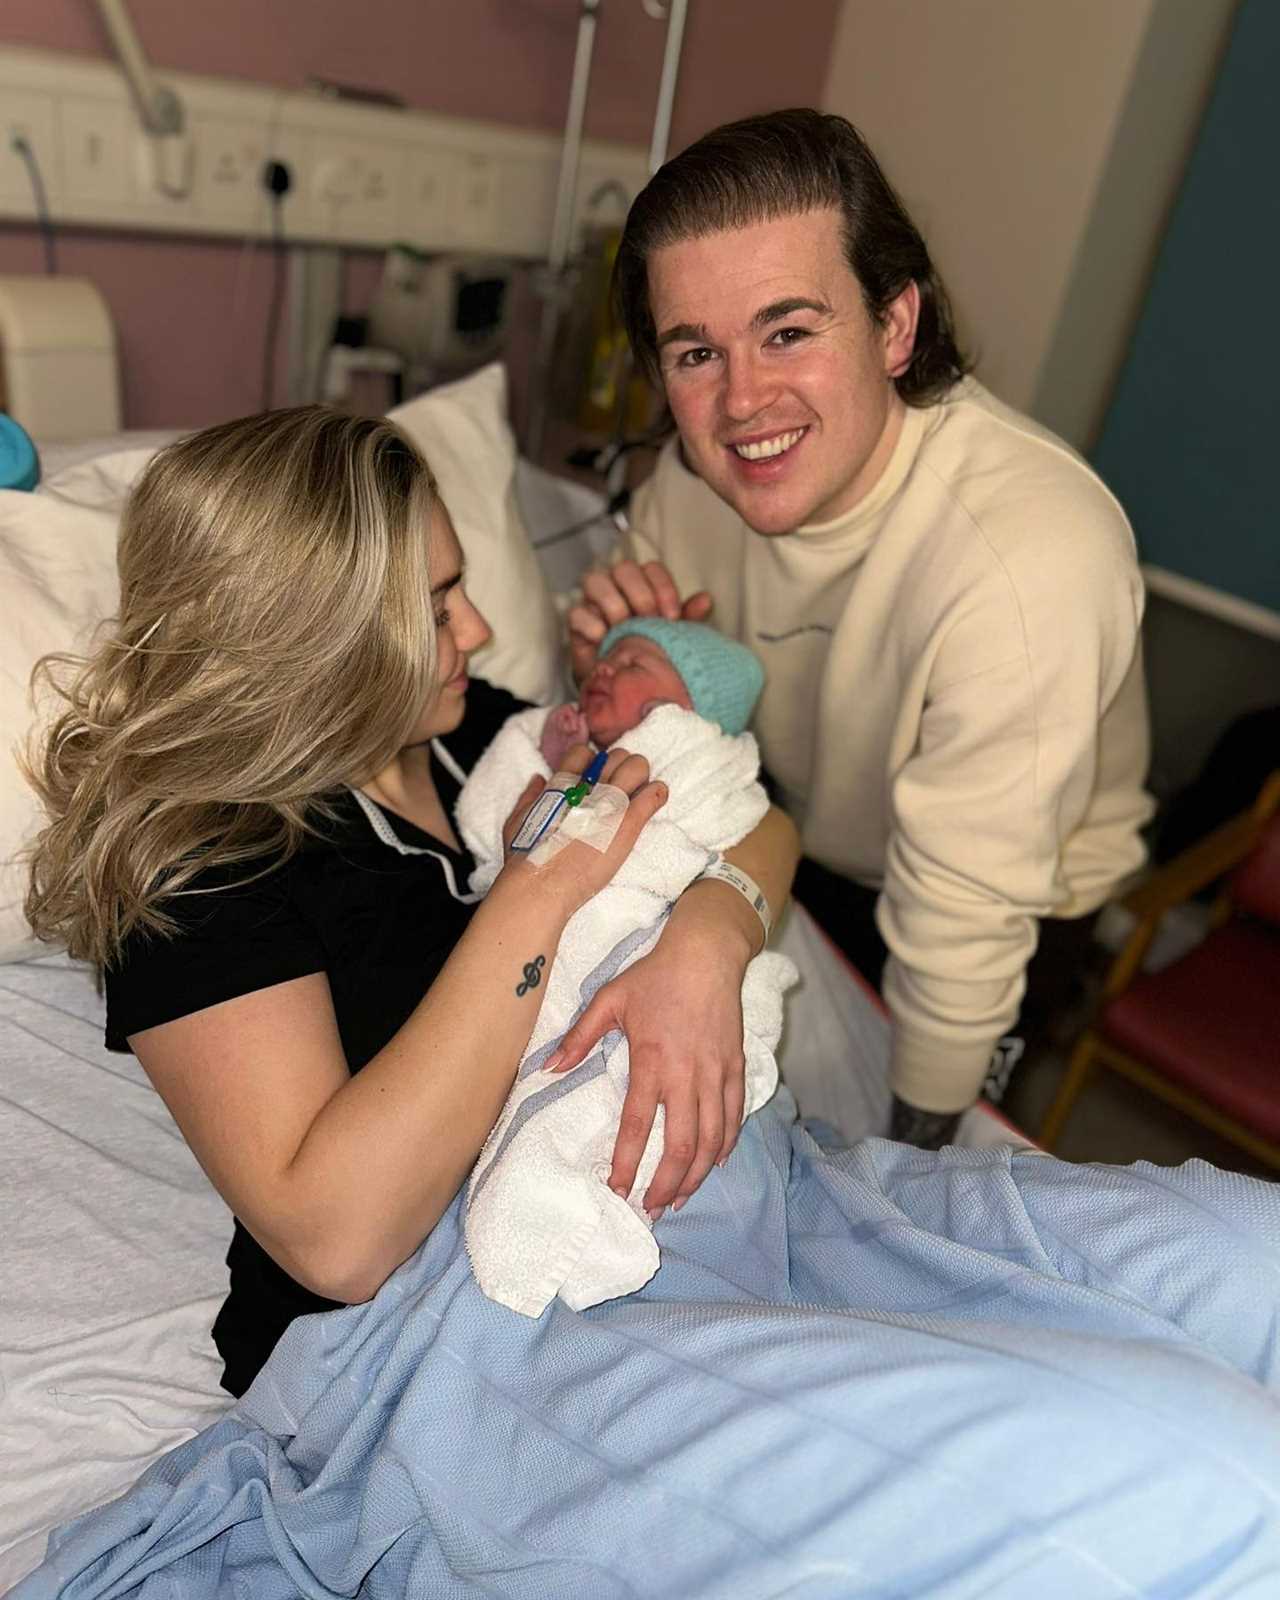 X Factor legend becomes a dad for the second time as partner gives birth and reveals adorable first pic and name